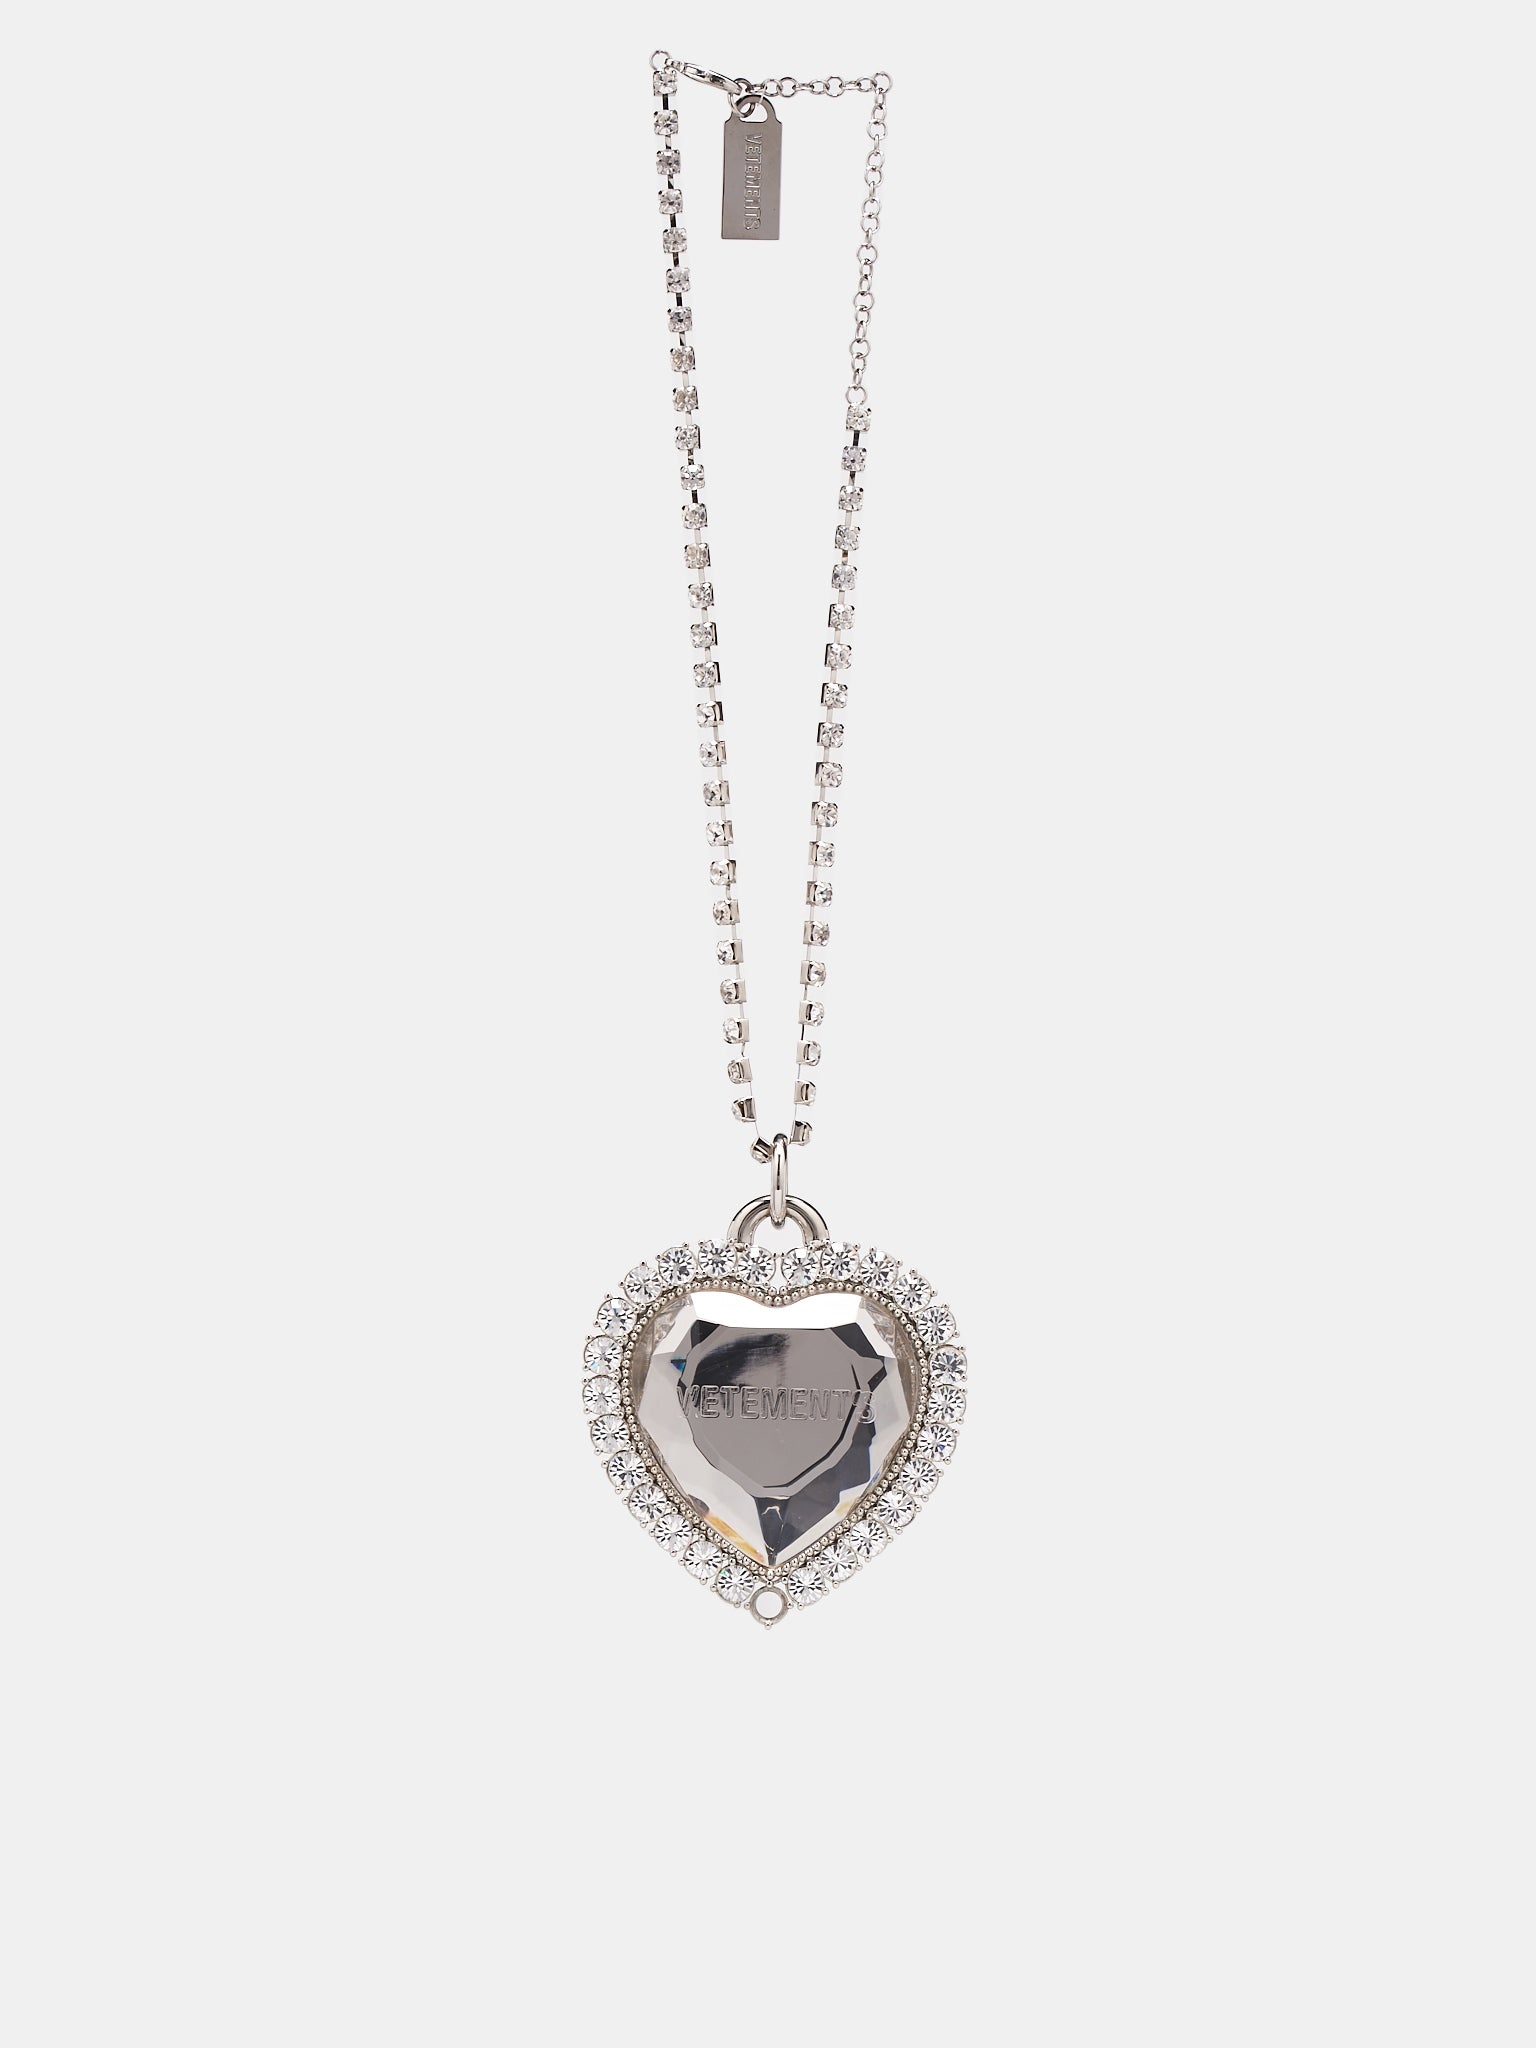 Giant Crystal Heart Necklace - 1